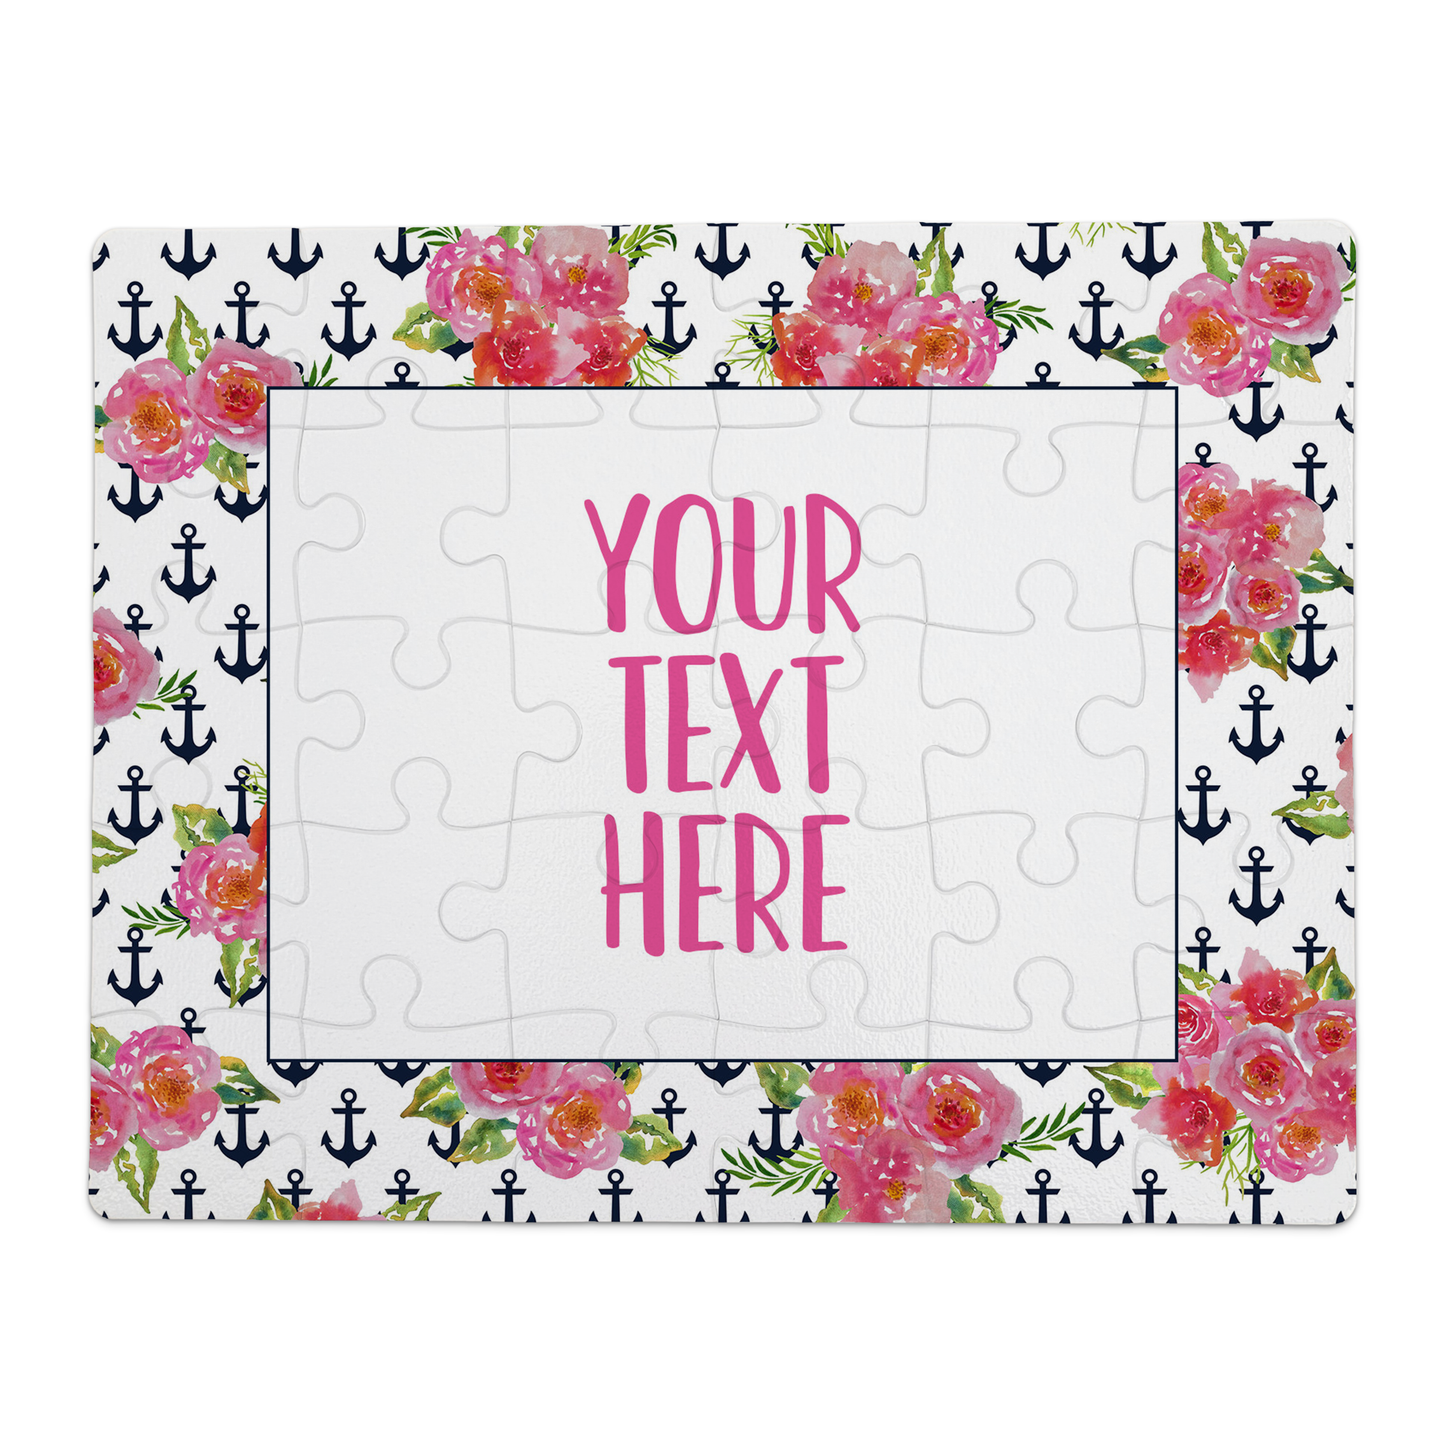 Create Your Own Puzzle - Floral & Anchors Design - CYOP0044